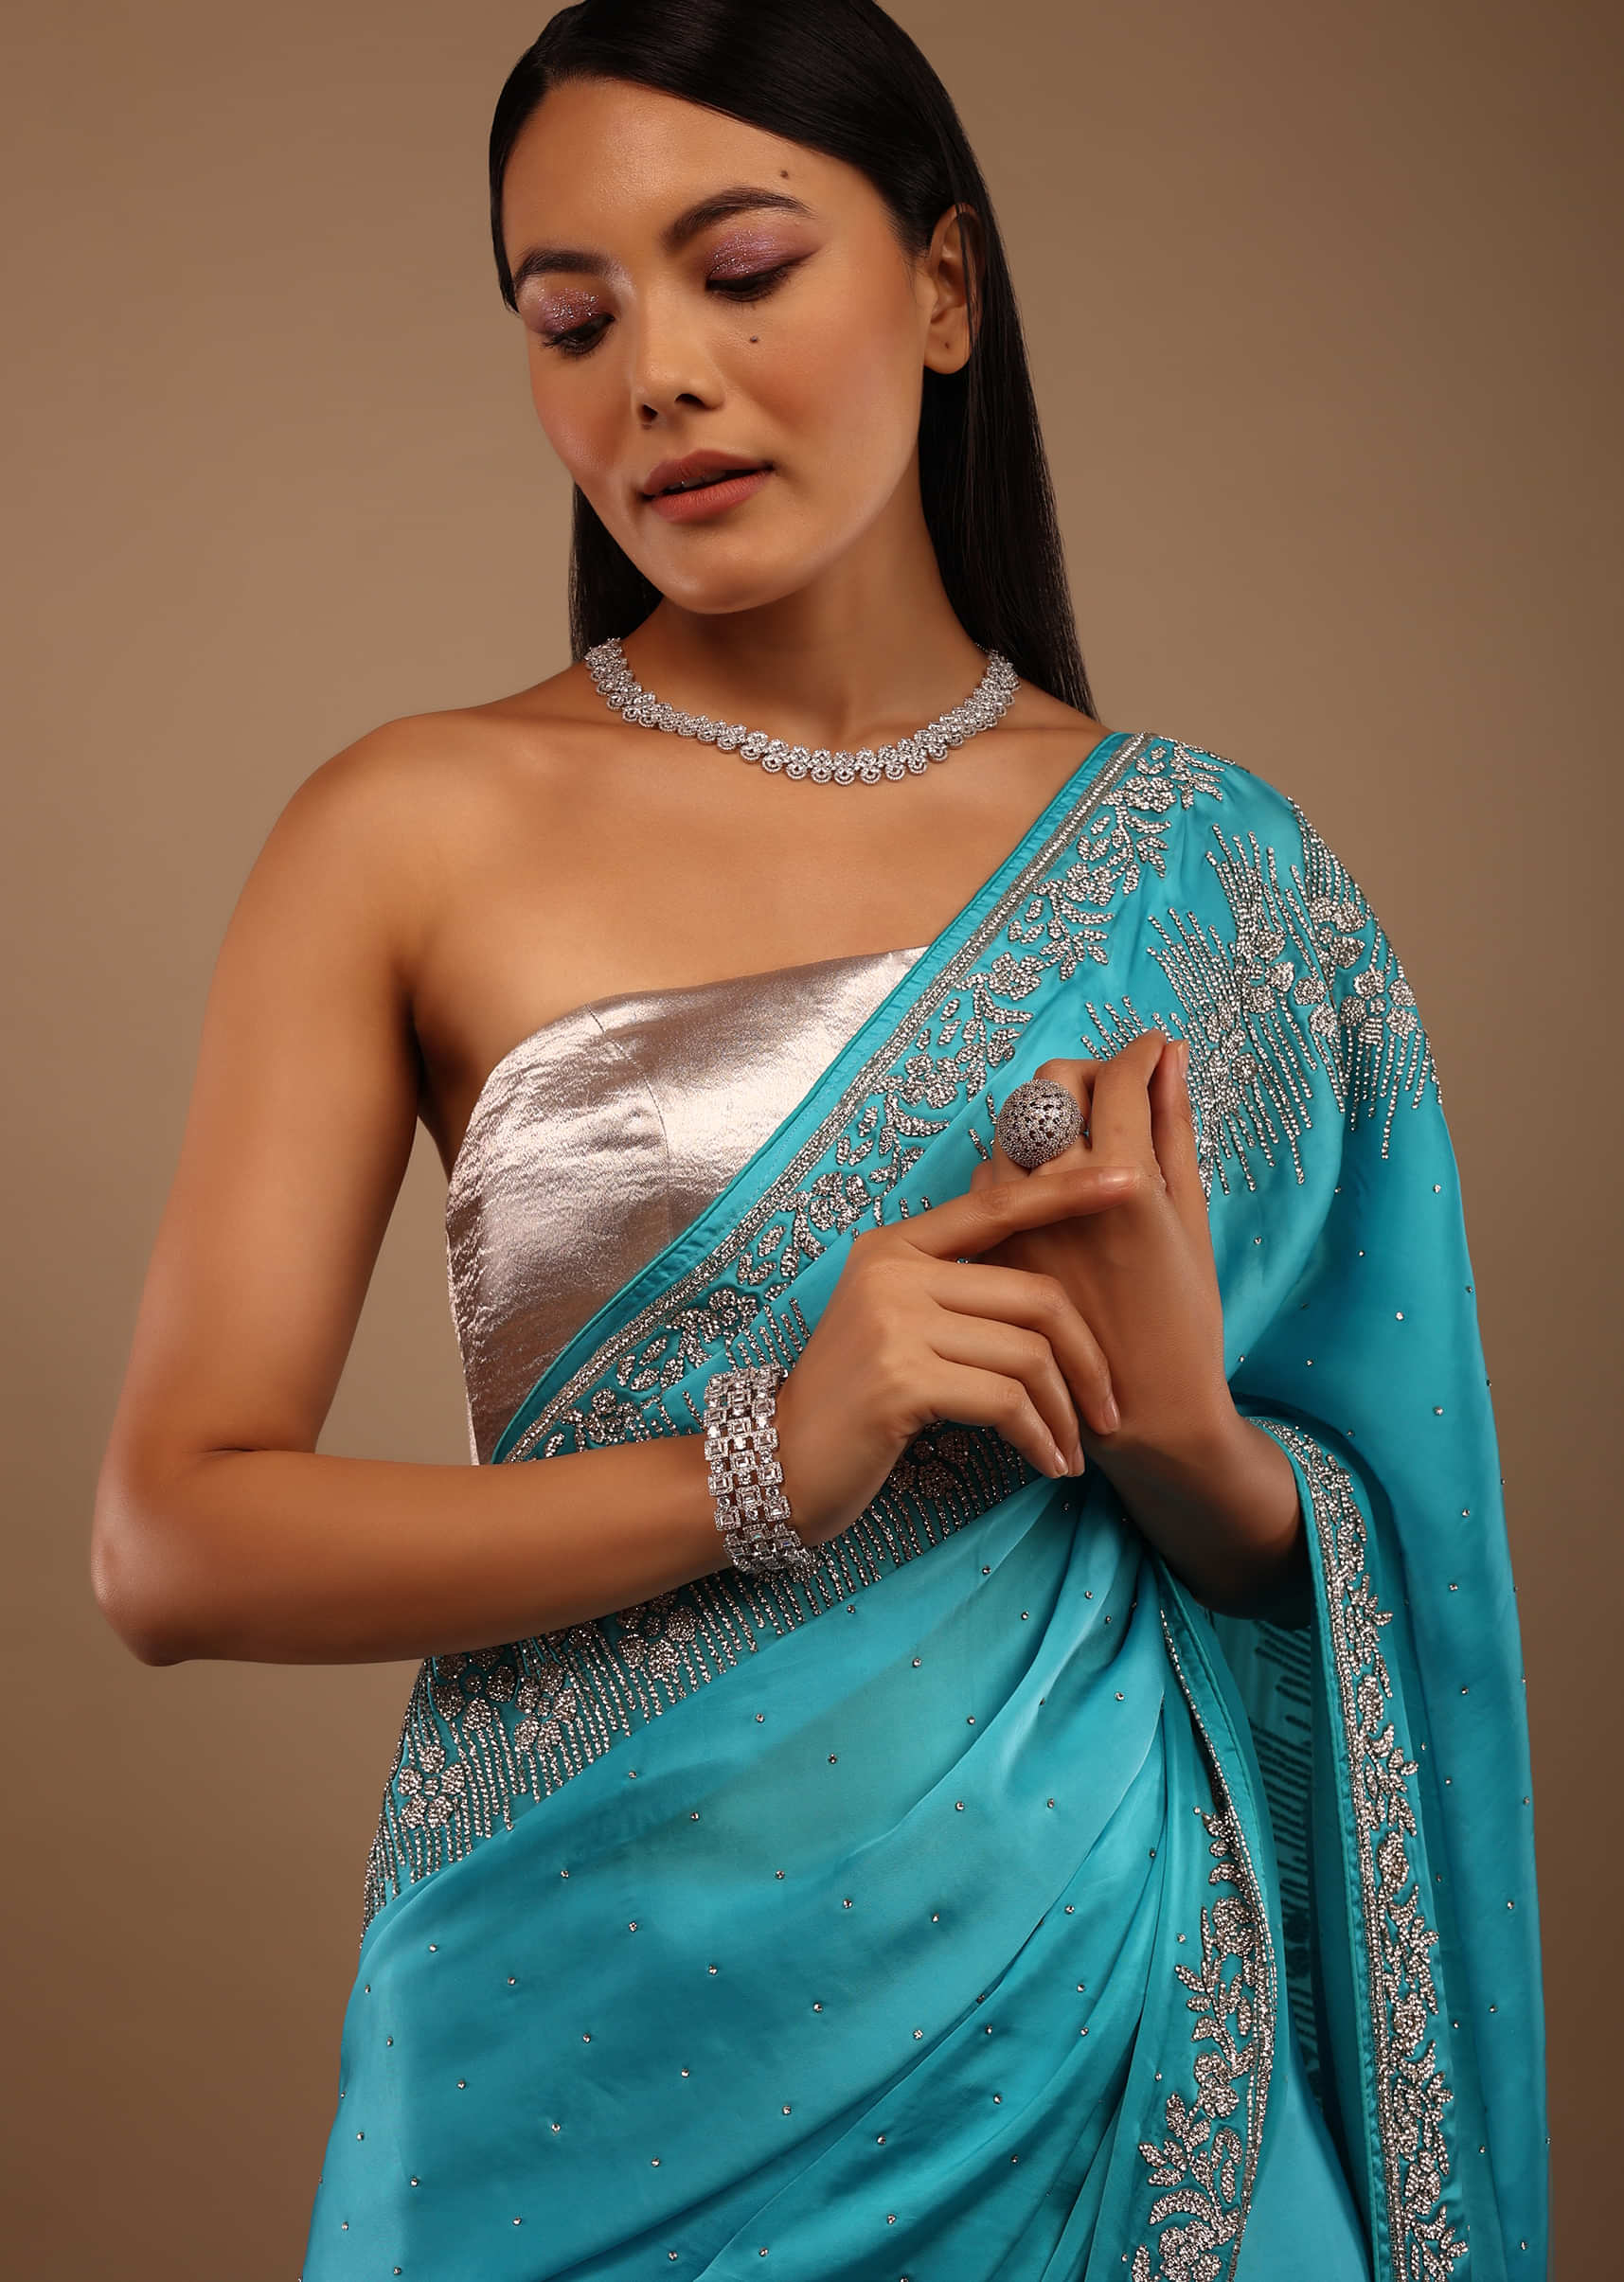 River Blue Satin Saree With Swarovski Stone Work In A Floral Pattern